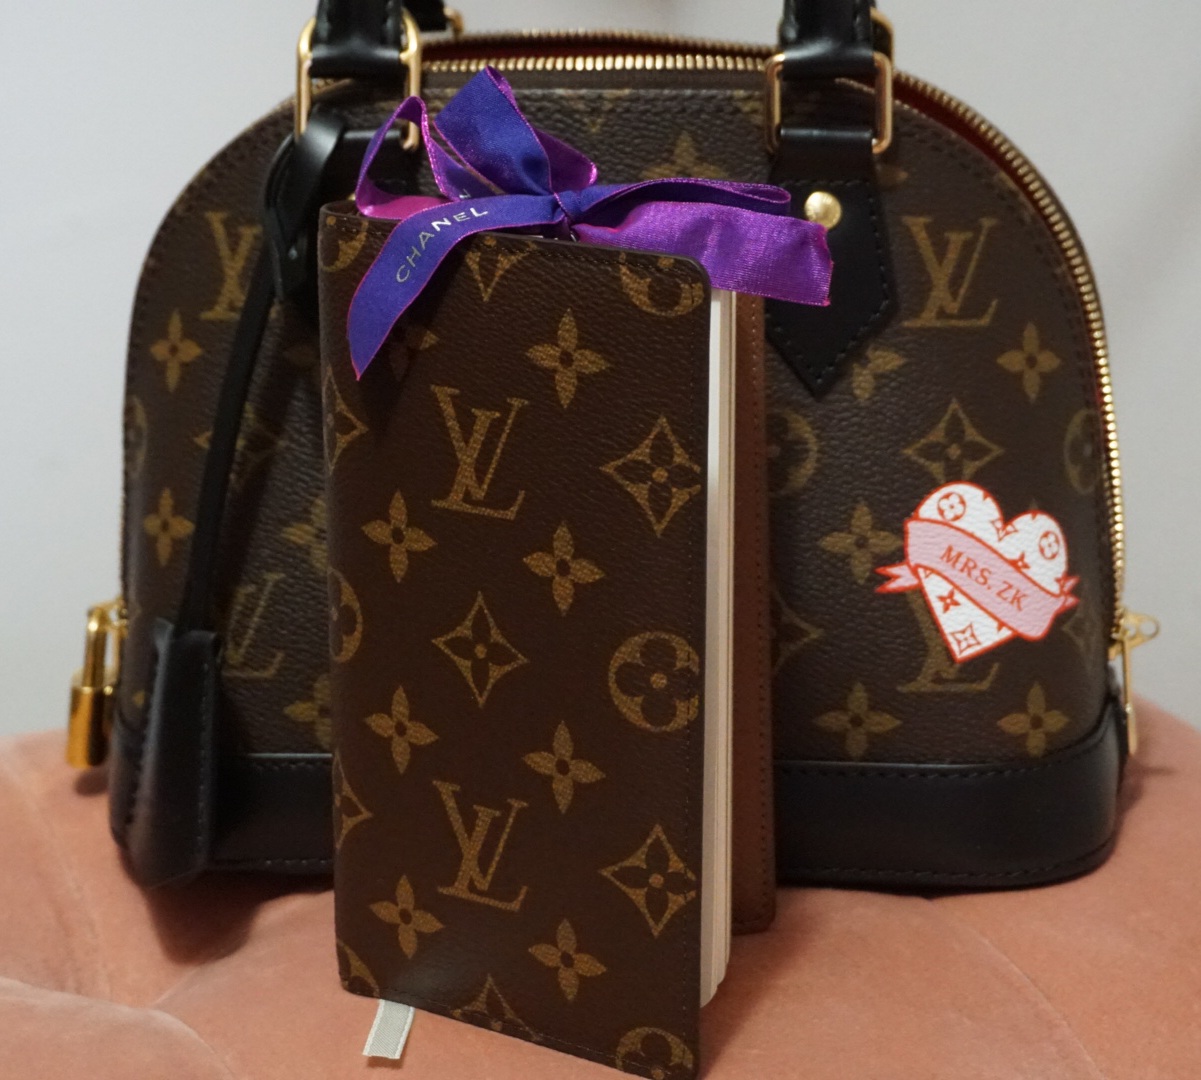 LUXURY HAUL  Louis Vuitton, Tiffany & Co. & what I got at Bergdorf's that  I wasn't supposed to buy! 